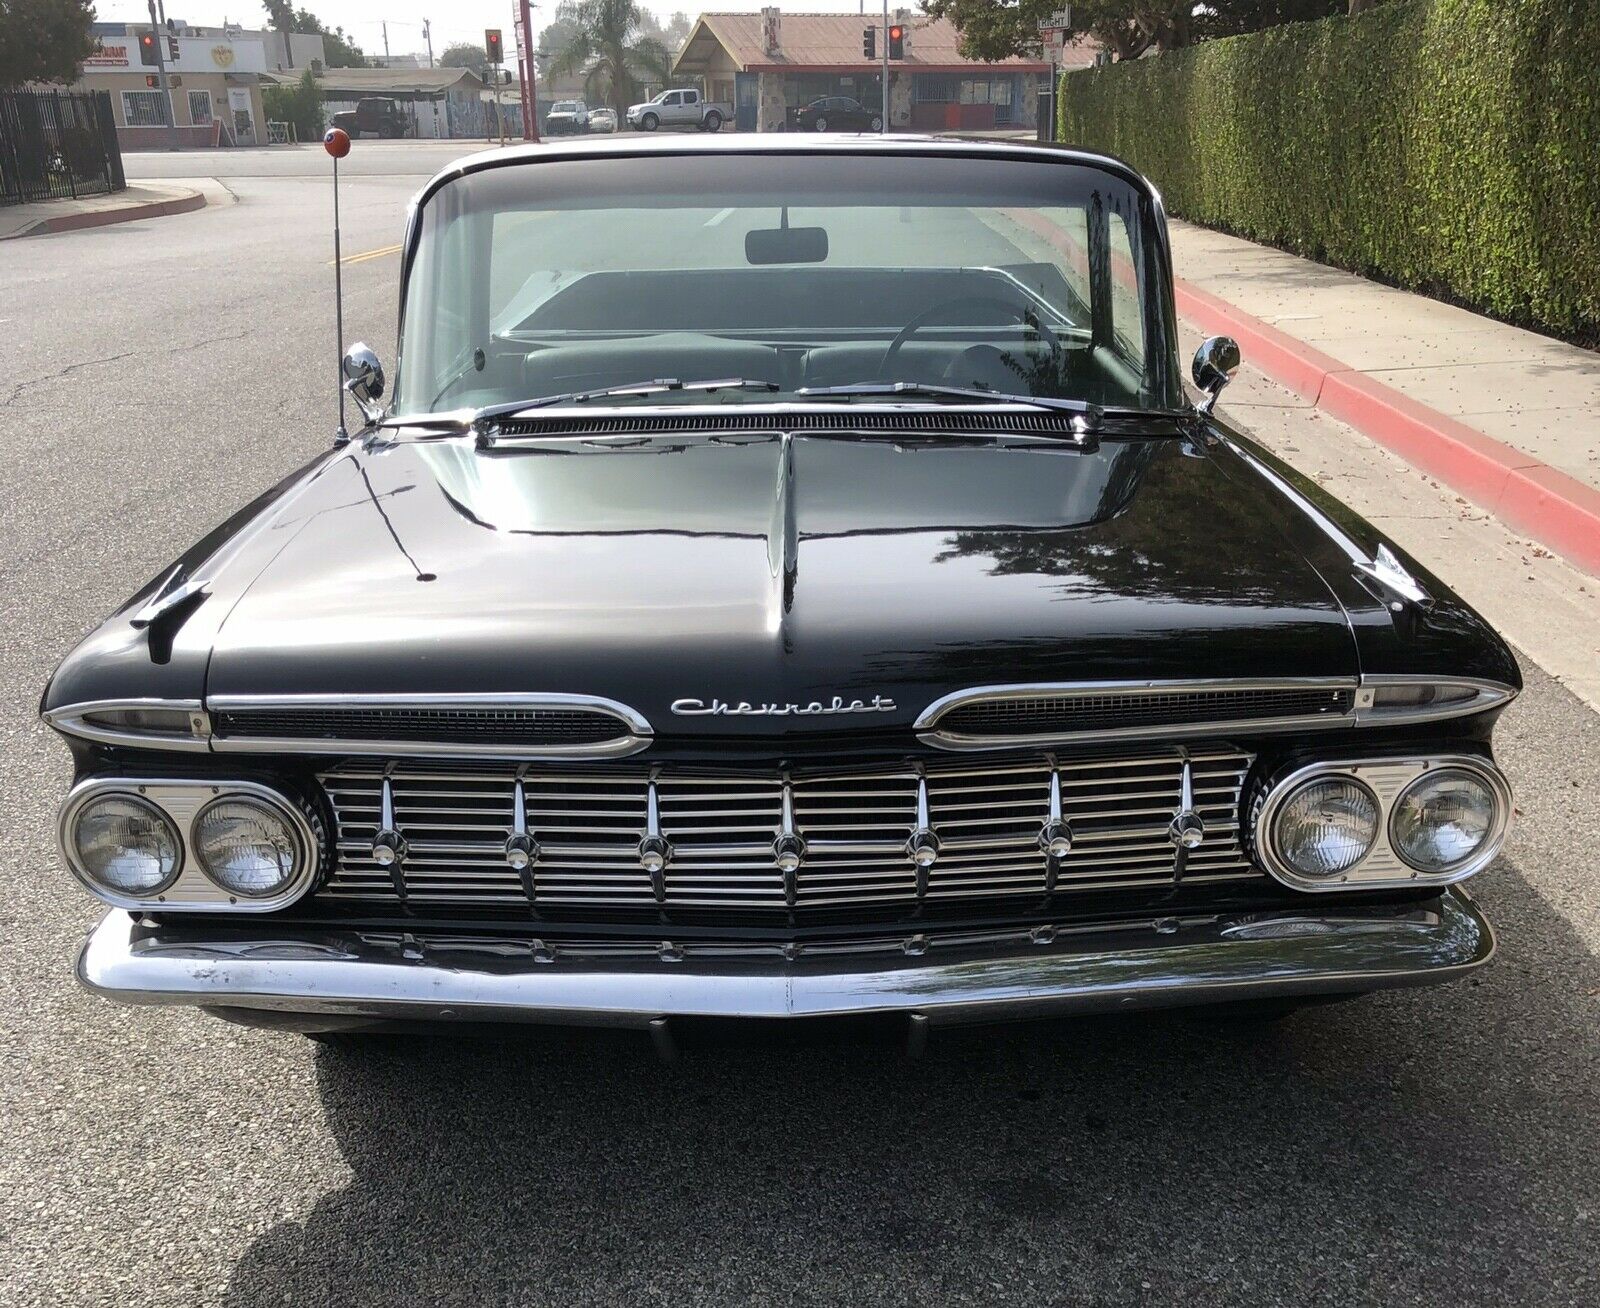 The 1959 Chevy El Camino Continues to Rise in Value - eBay Motors Blog